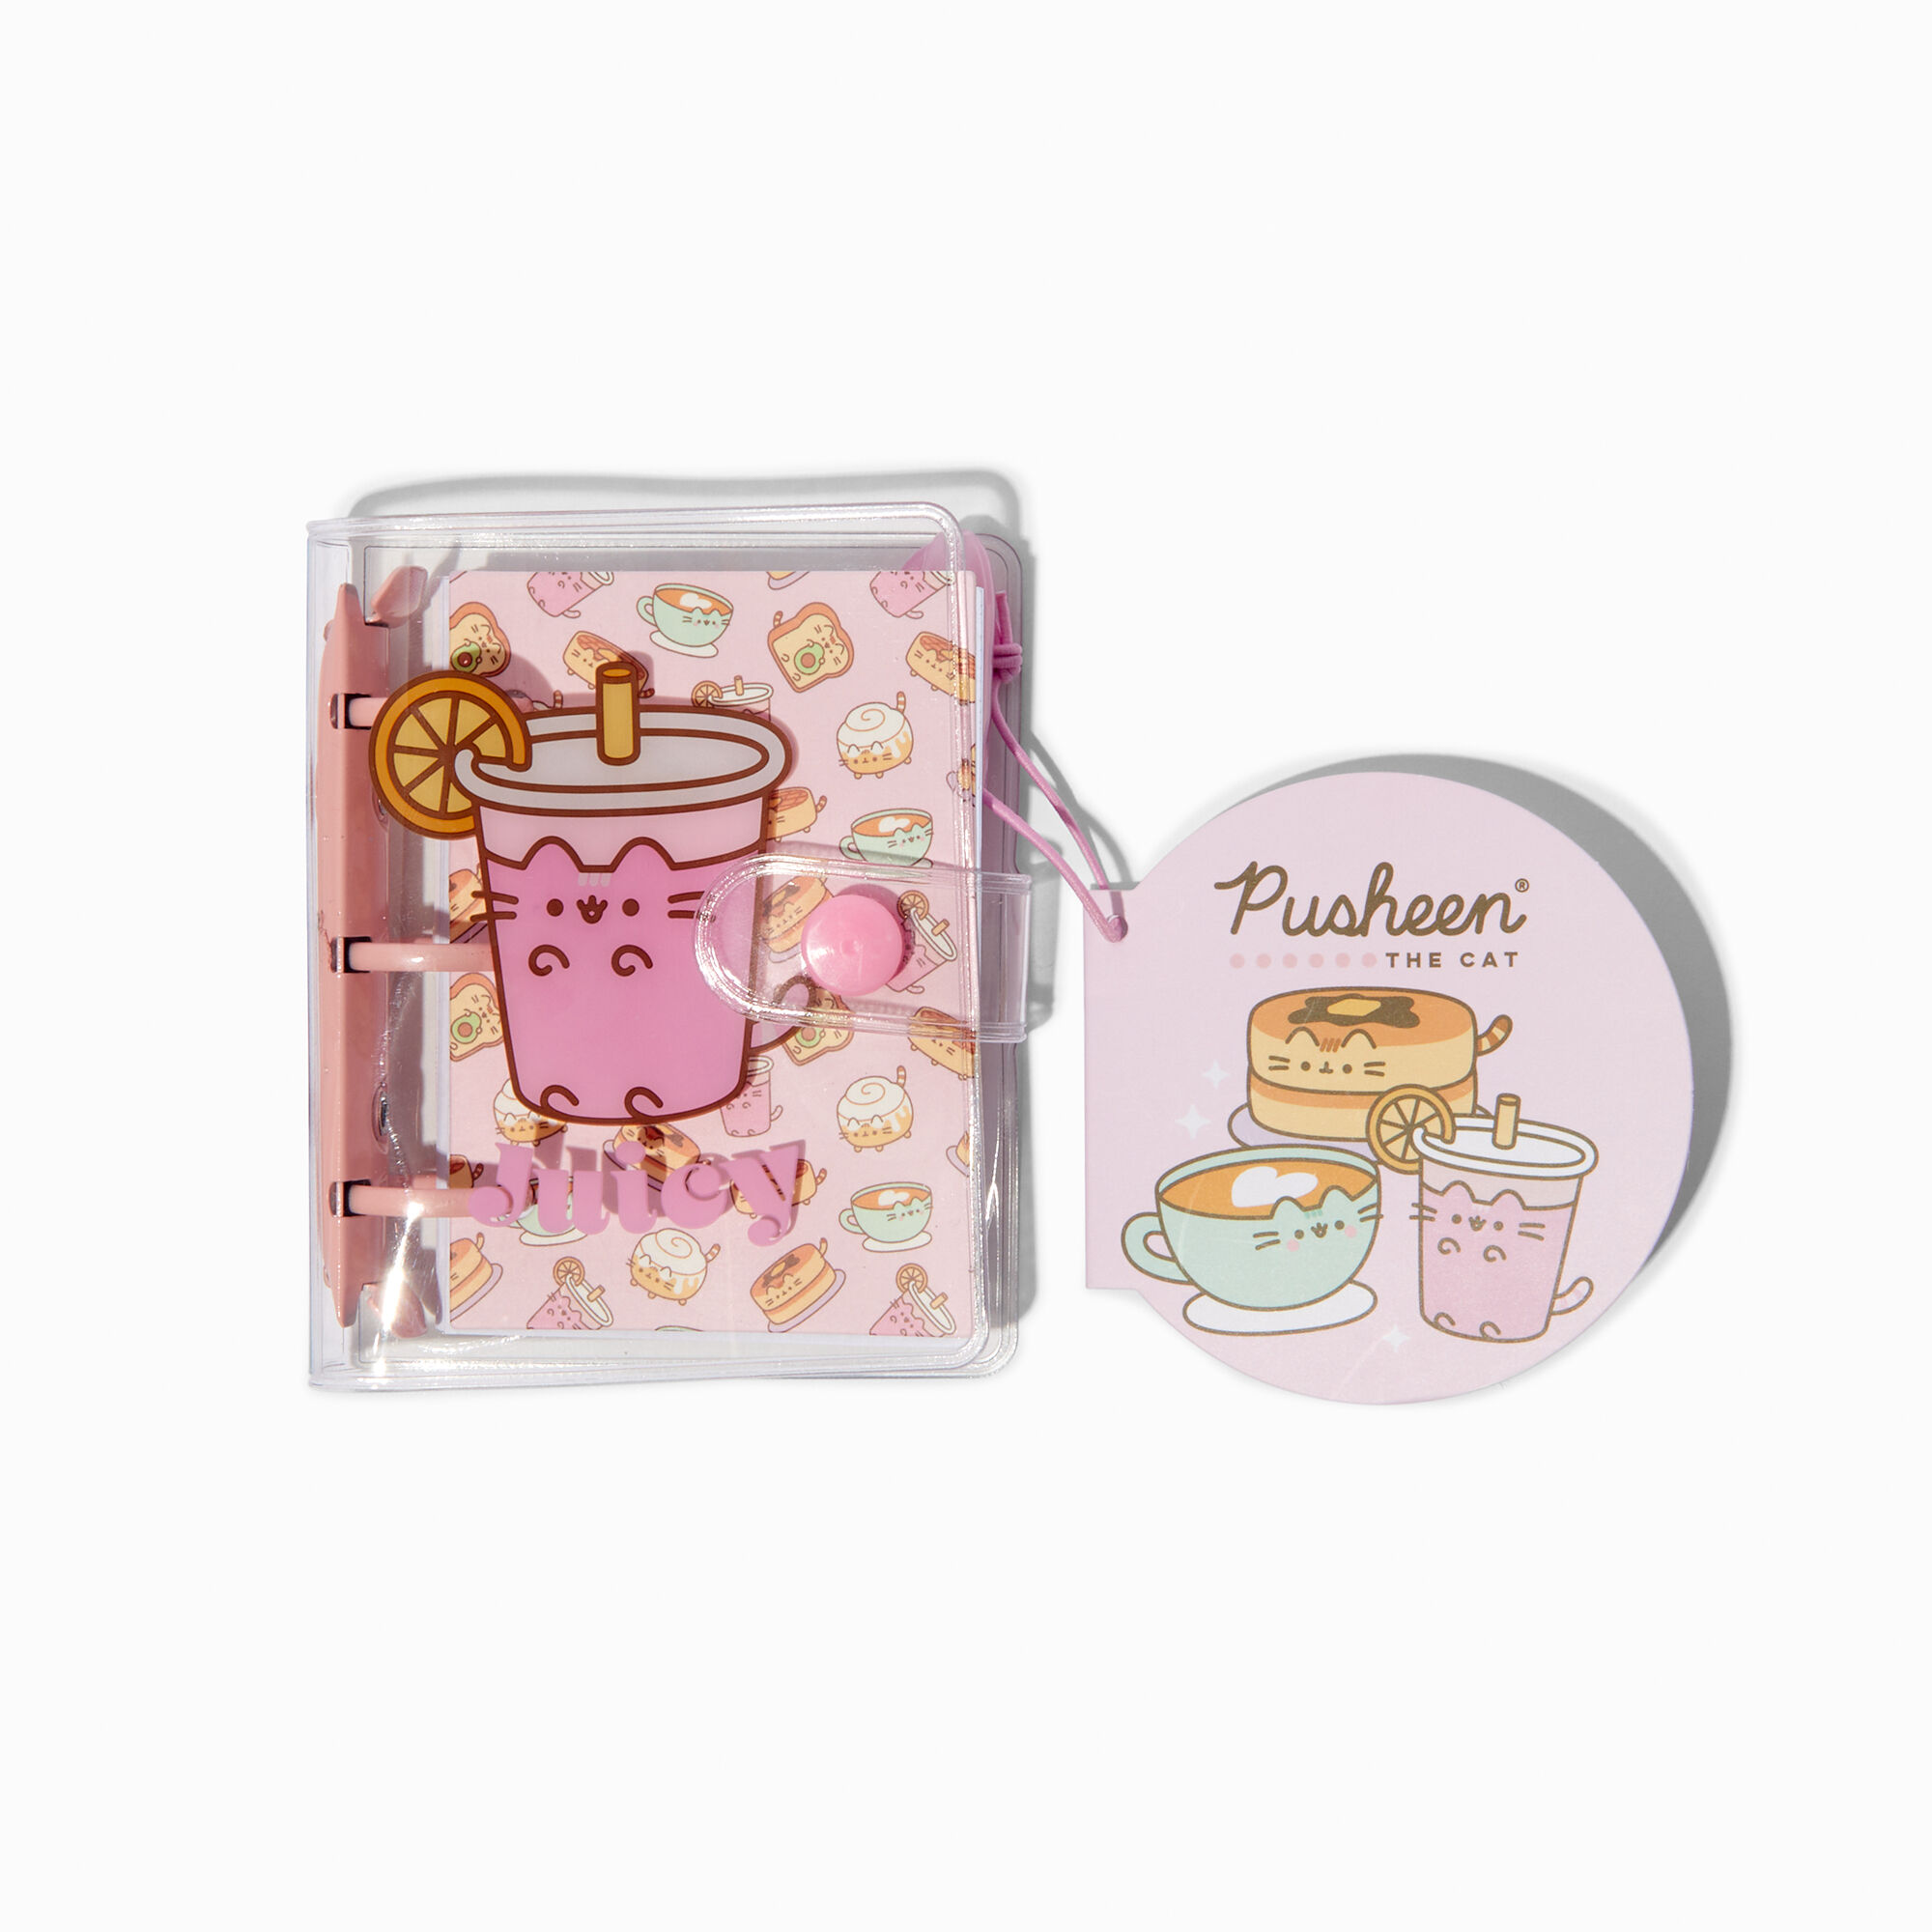 View Claires Pusheen Mini Planner information